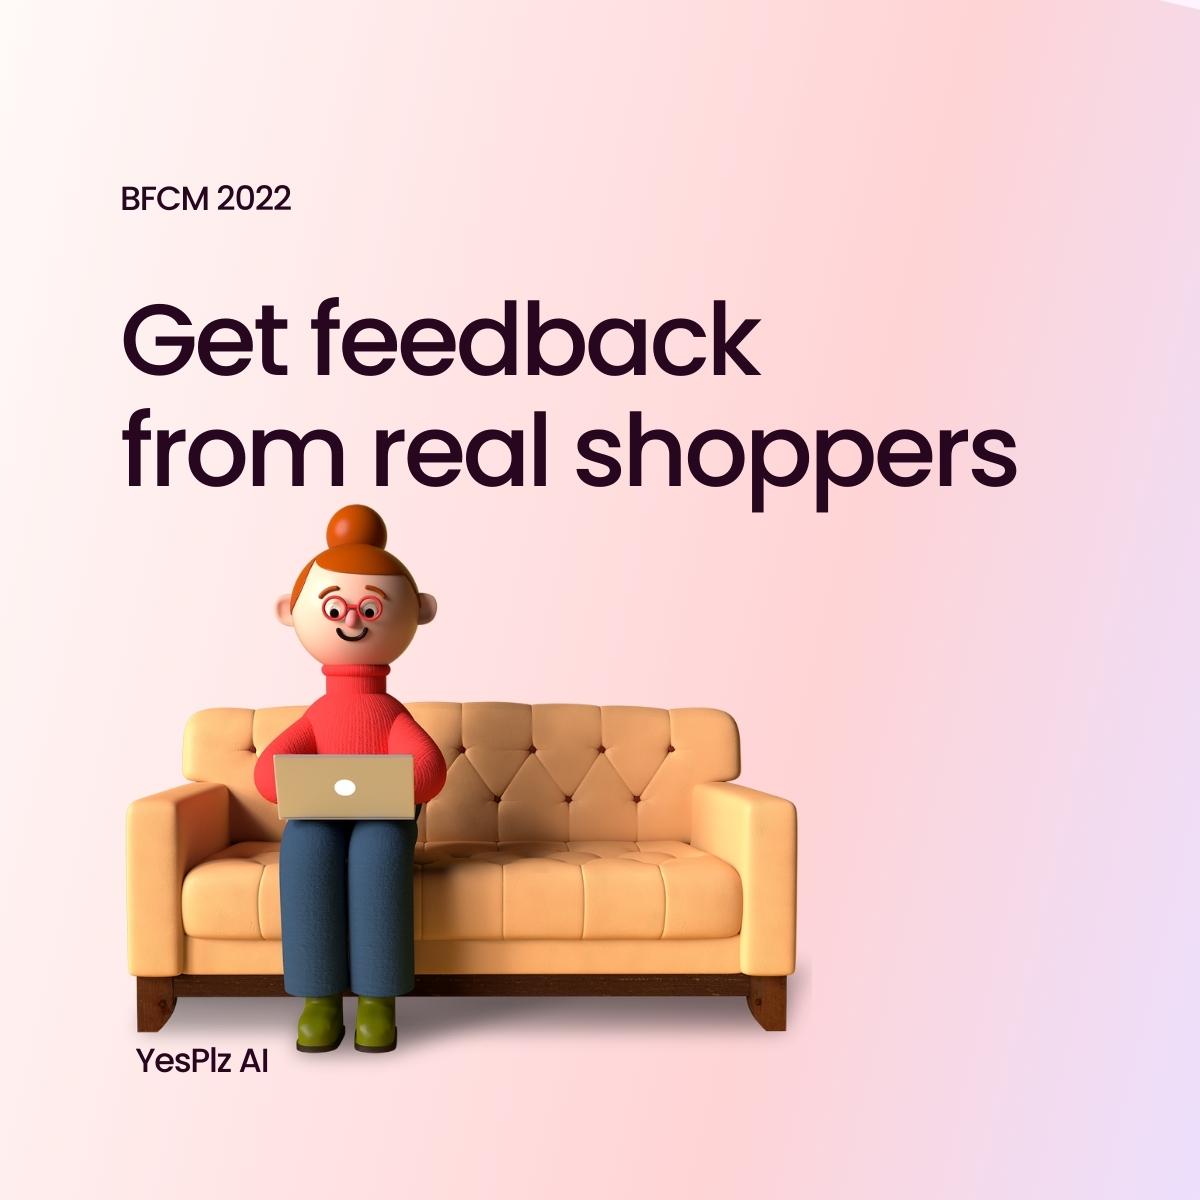 Get feedback form real shoppers as a BFCM 2022 tip